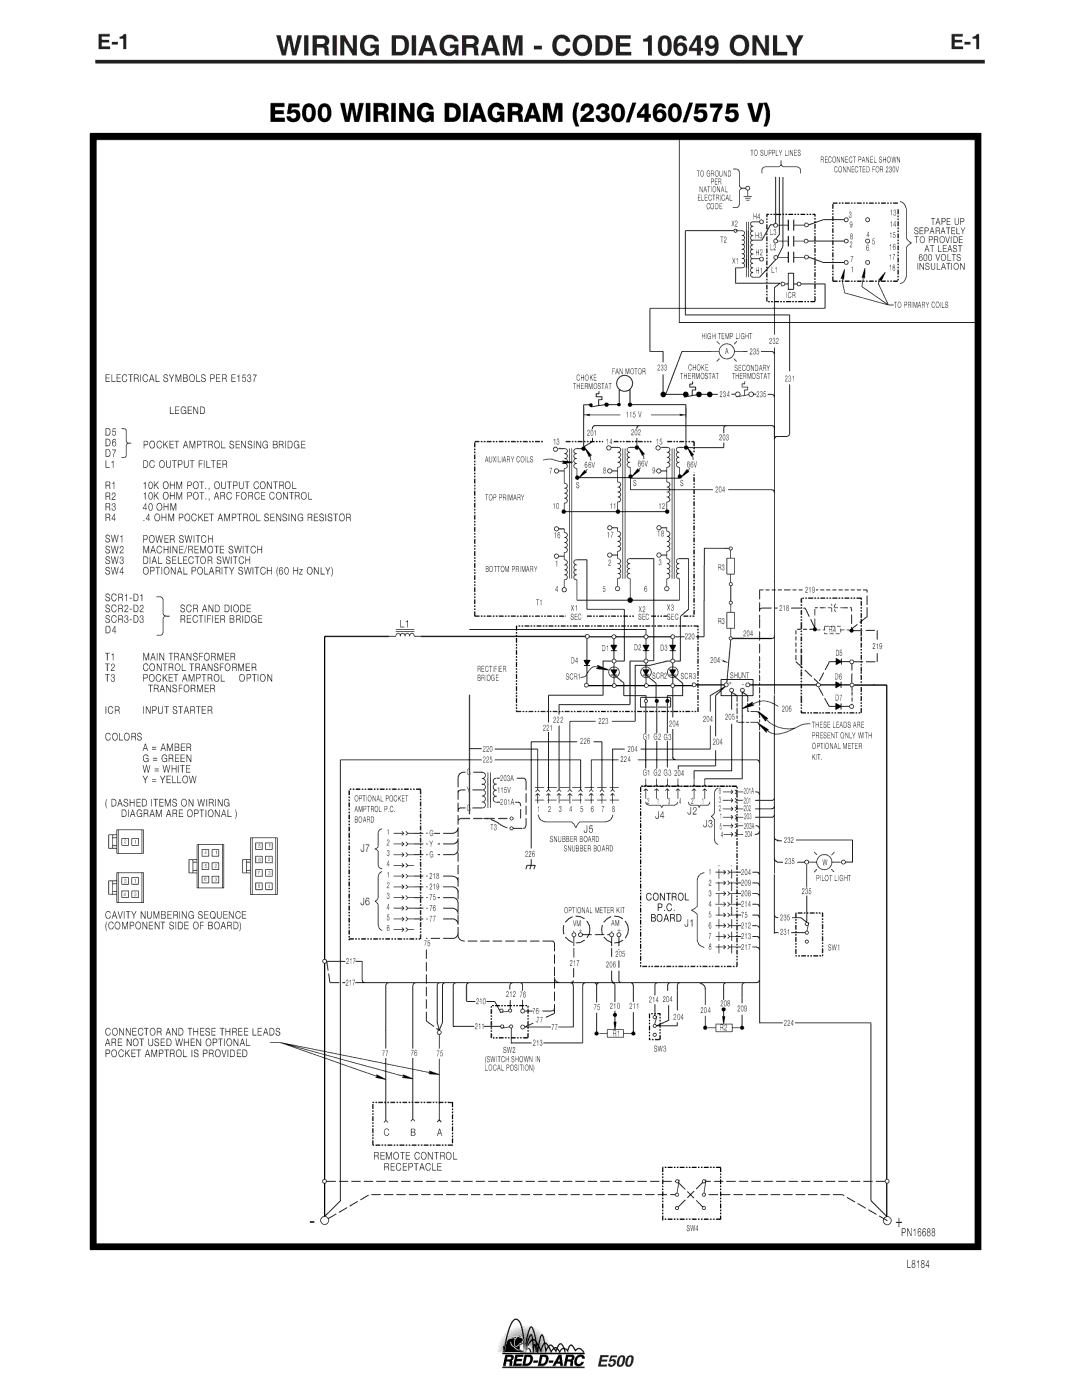 Lincoln Electric specifications Wiring Diagram Code 10649 only, E500 Wiring Diagram 230/460/575 